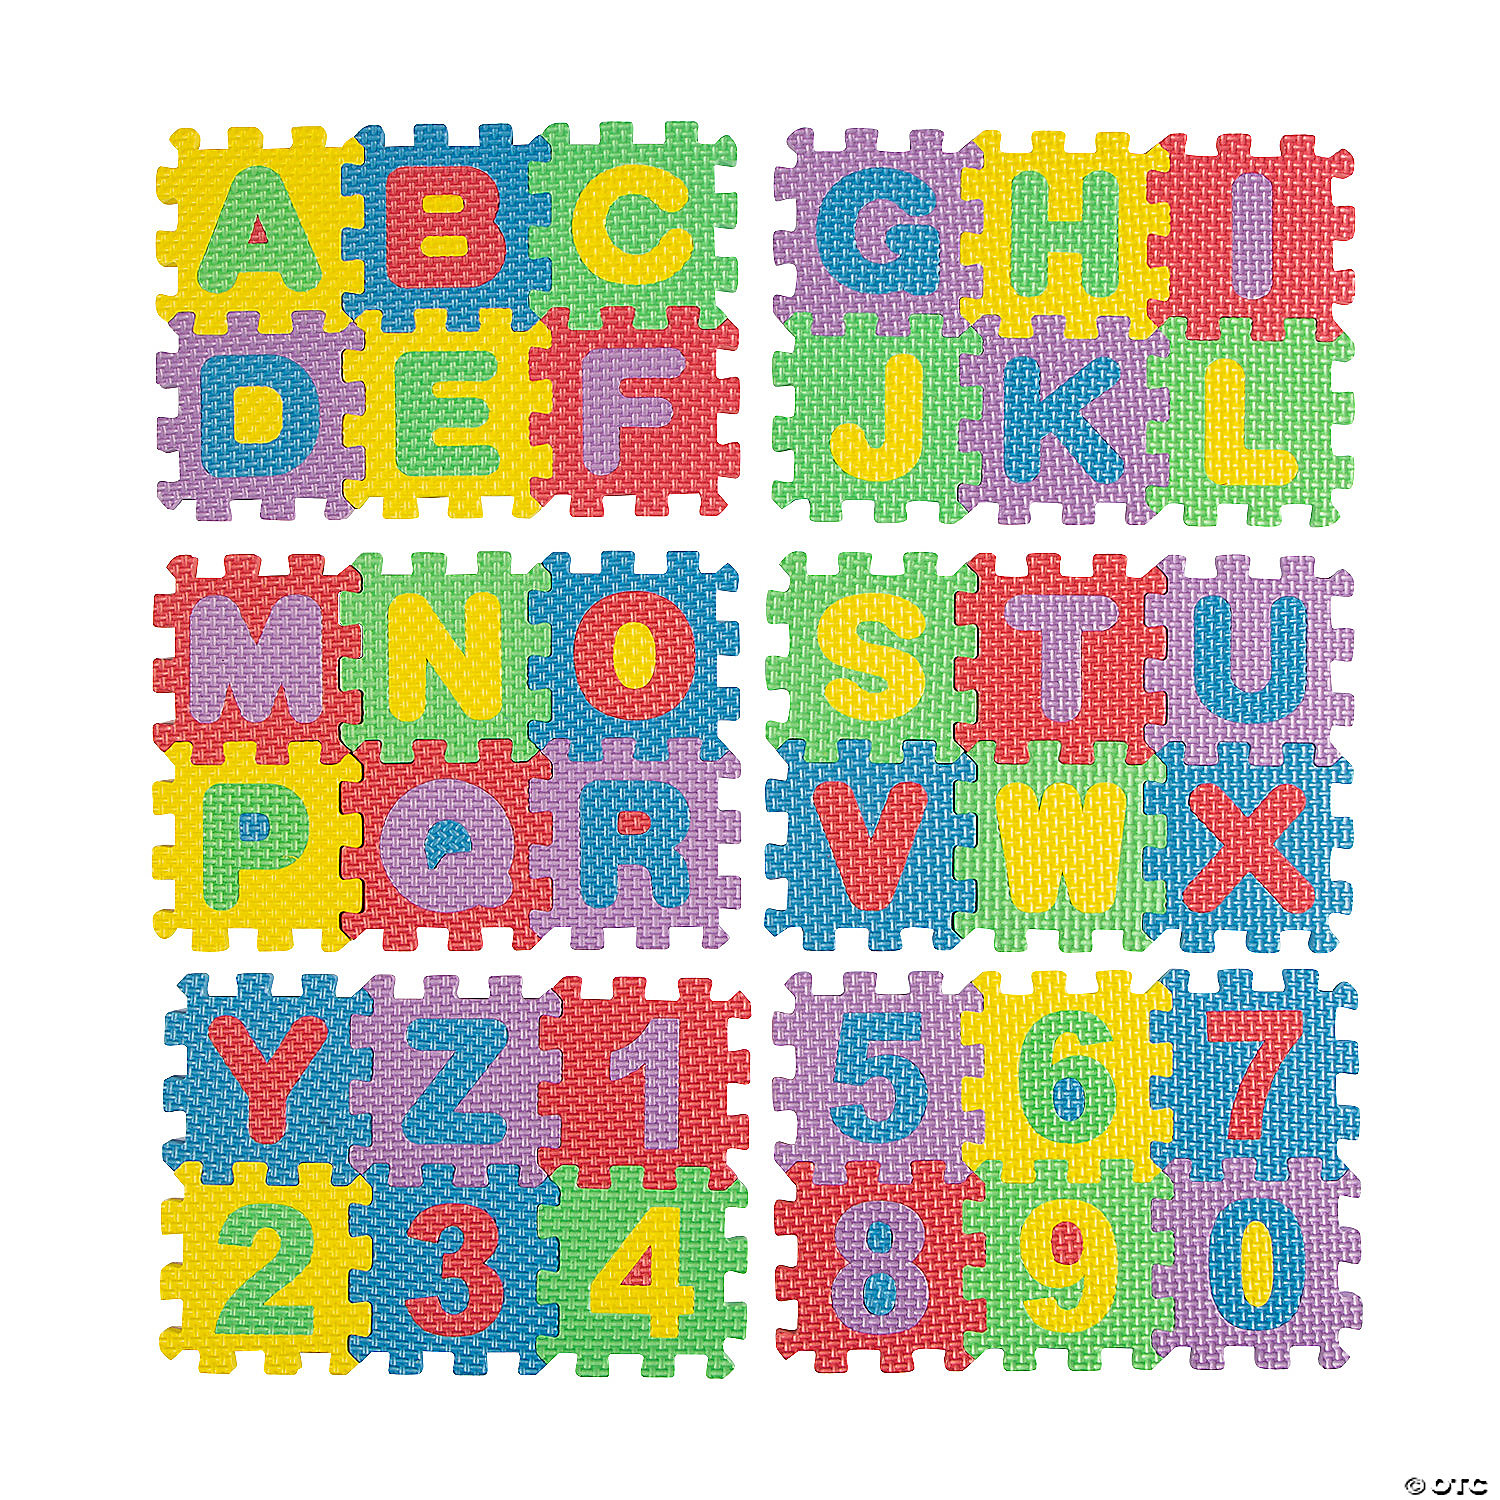 Crayola Foam Letters & Numbers, Assorted Colors, 266 Pieces